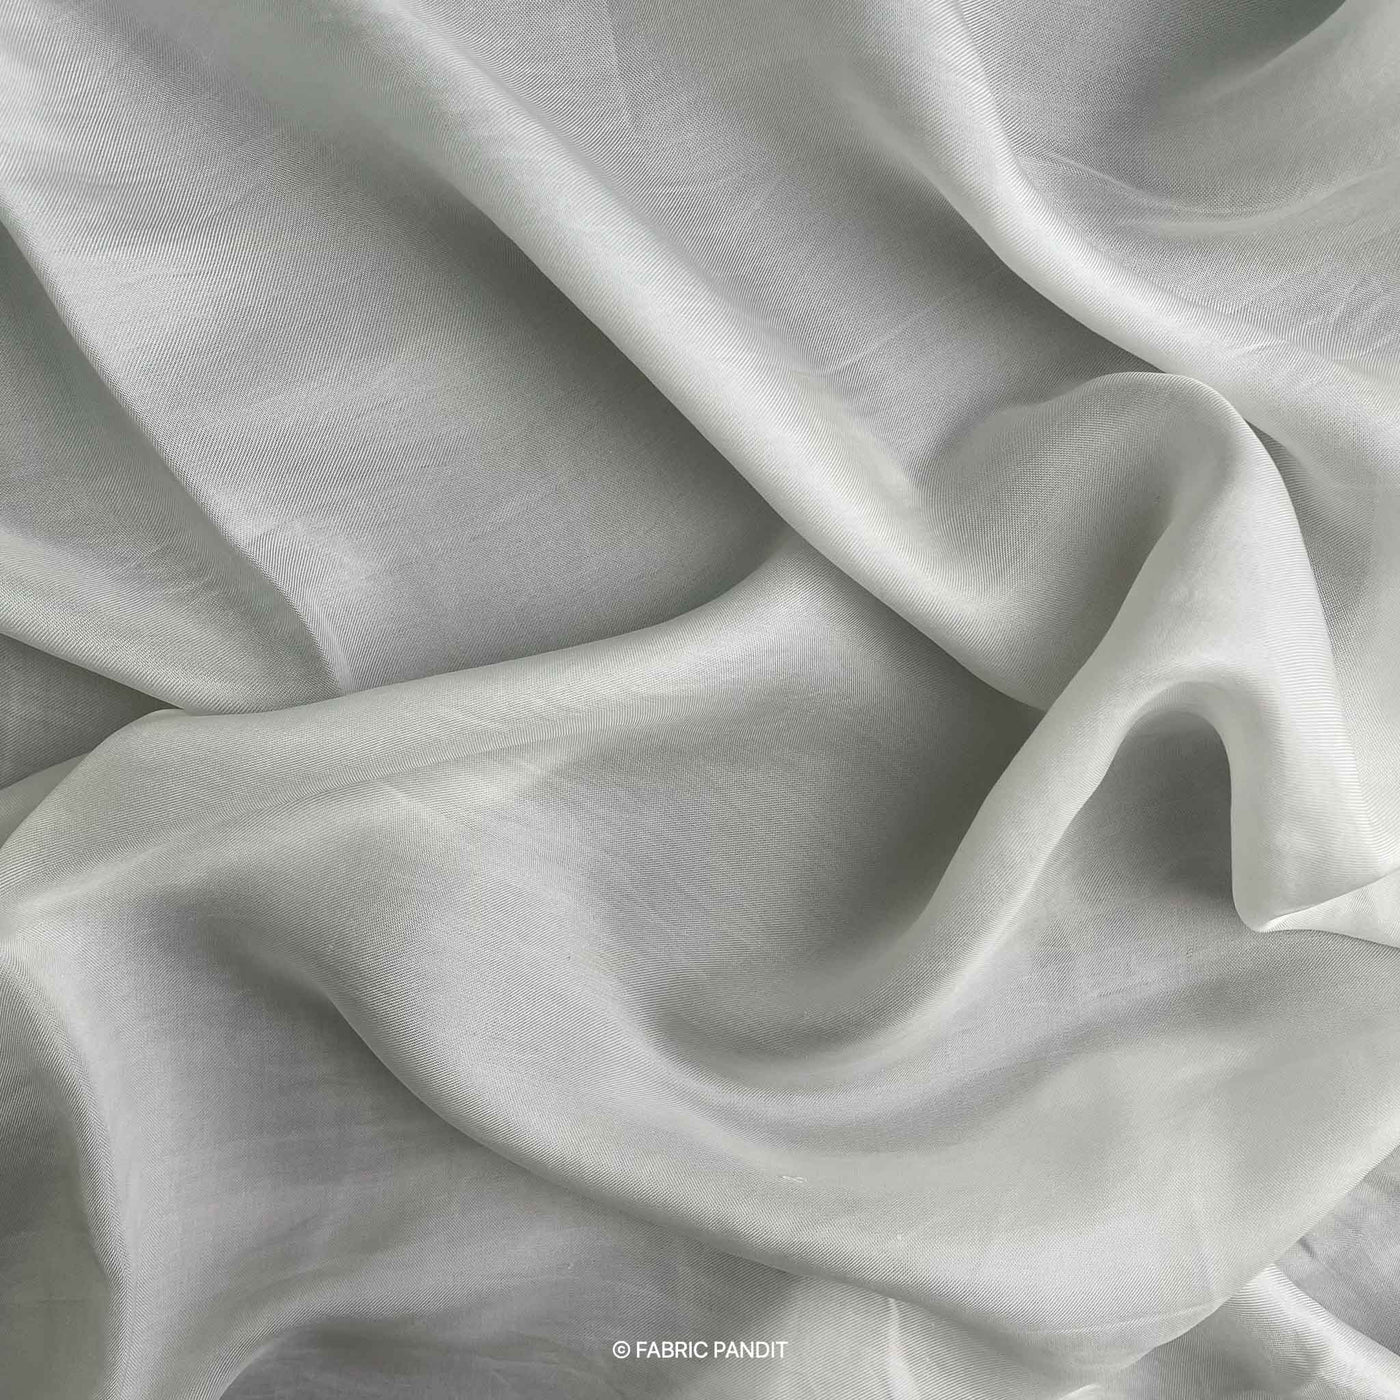 Dyeable Fabric Cut Piece (CUT PIECE) White Dyeable Pure Bemberg Satin Plain Fabric (Width 44 inches)